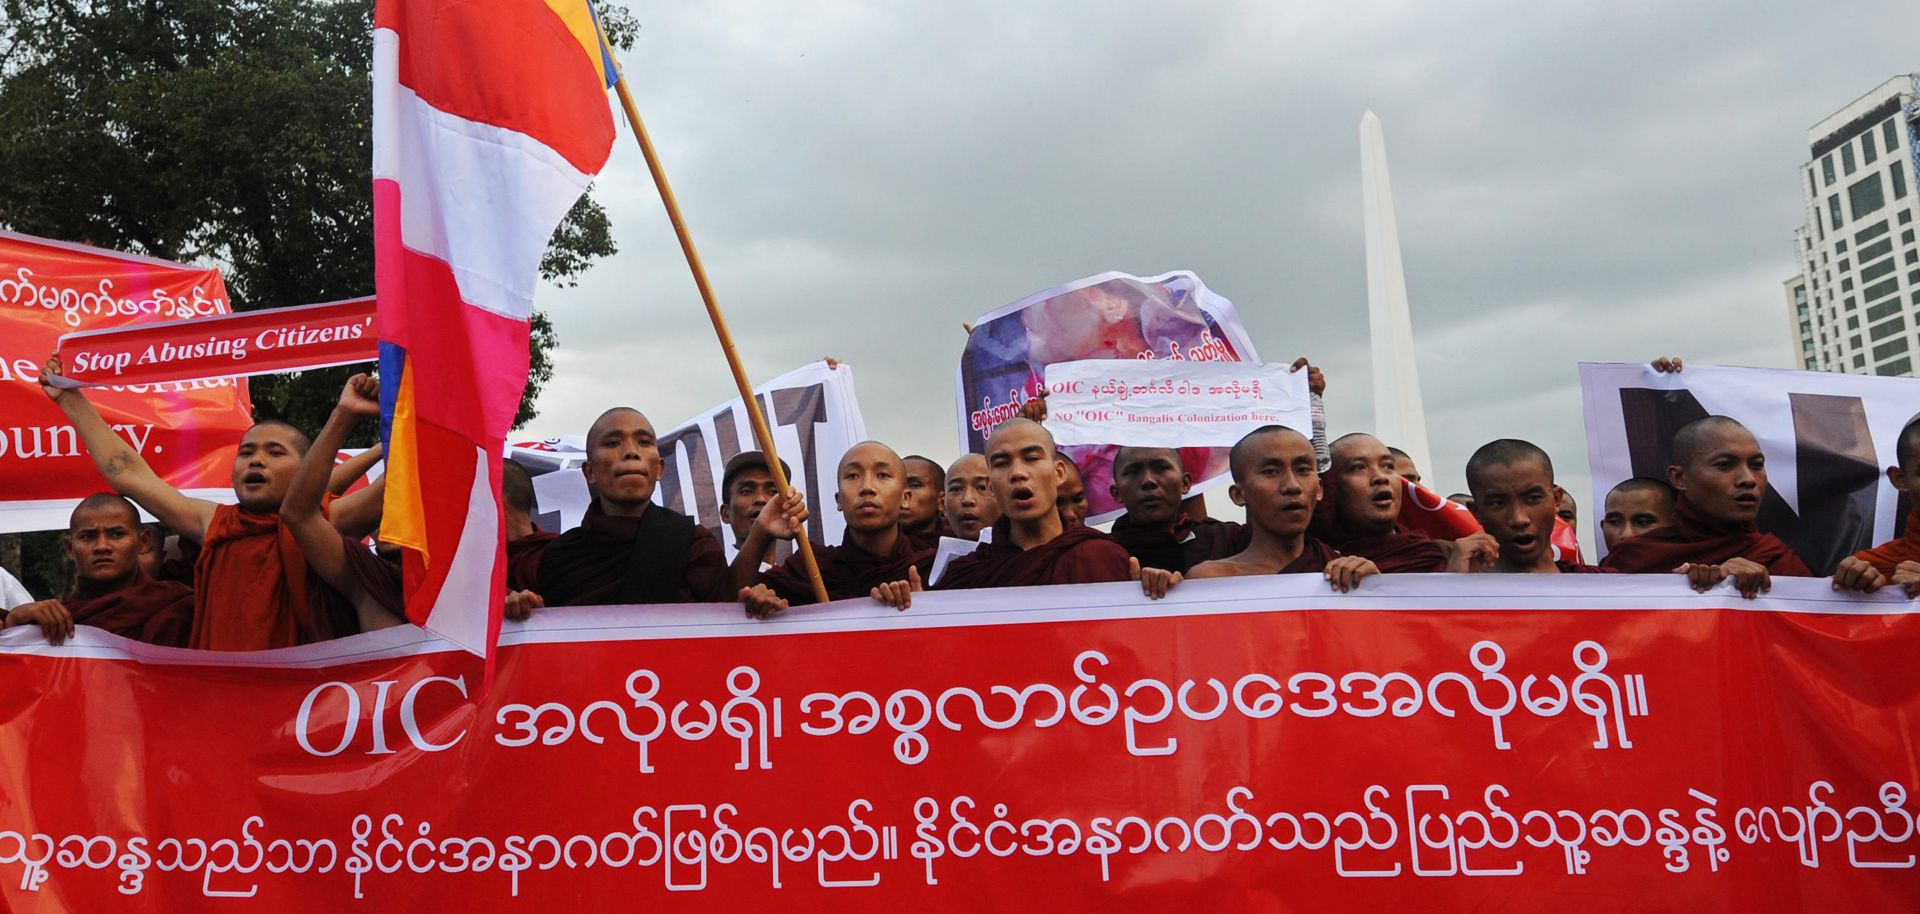 The Buddhist Core of Fractured Myanmar